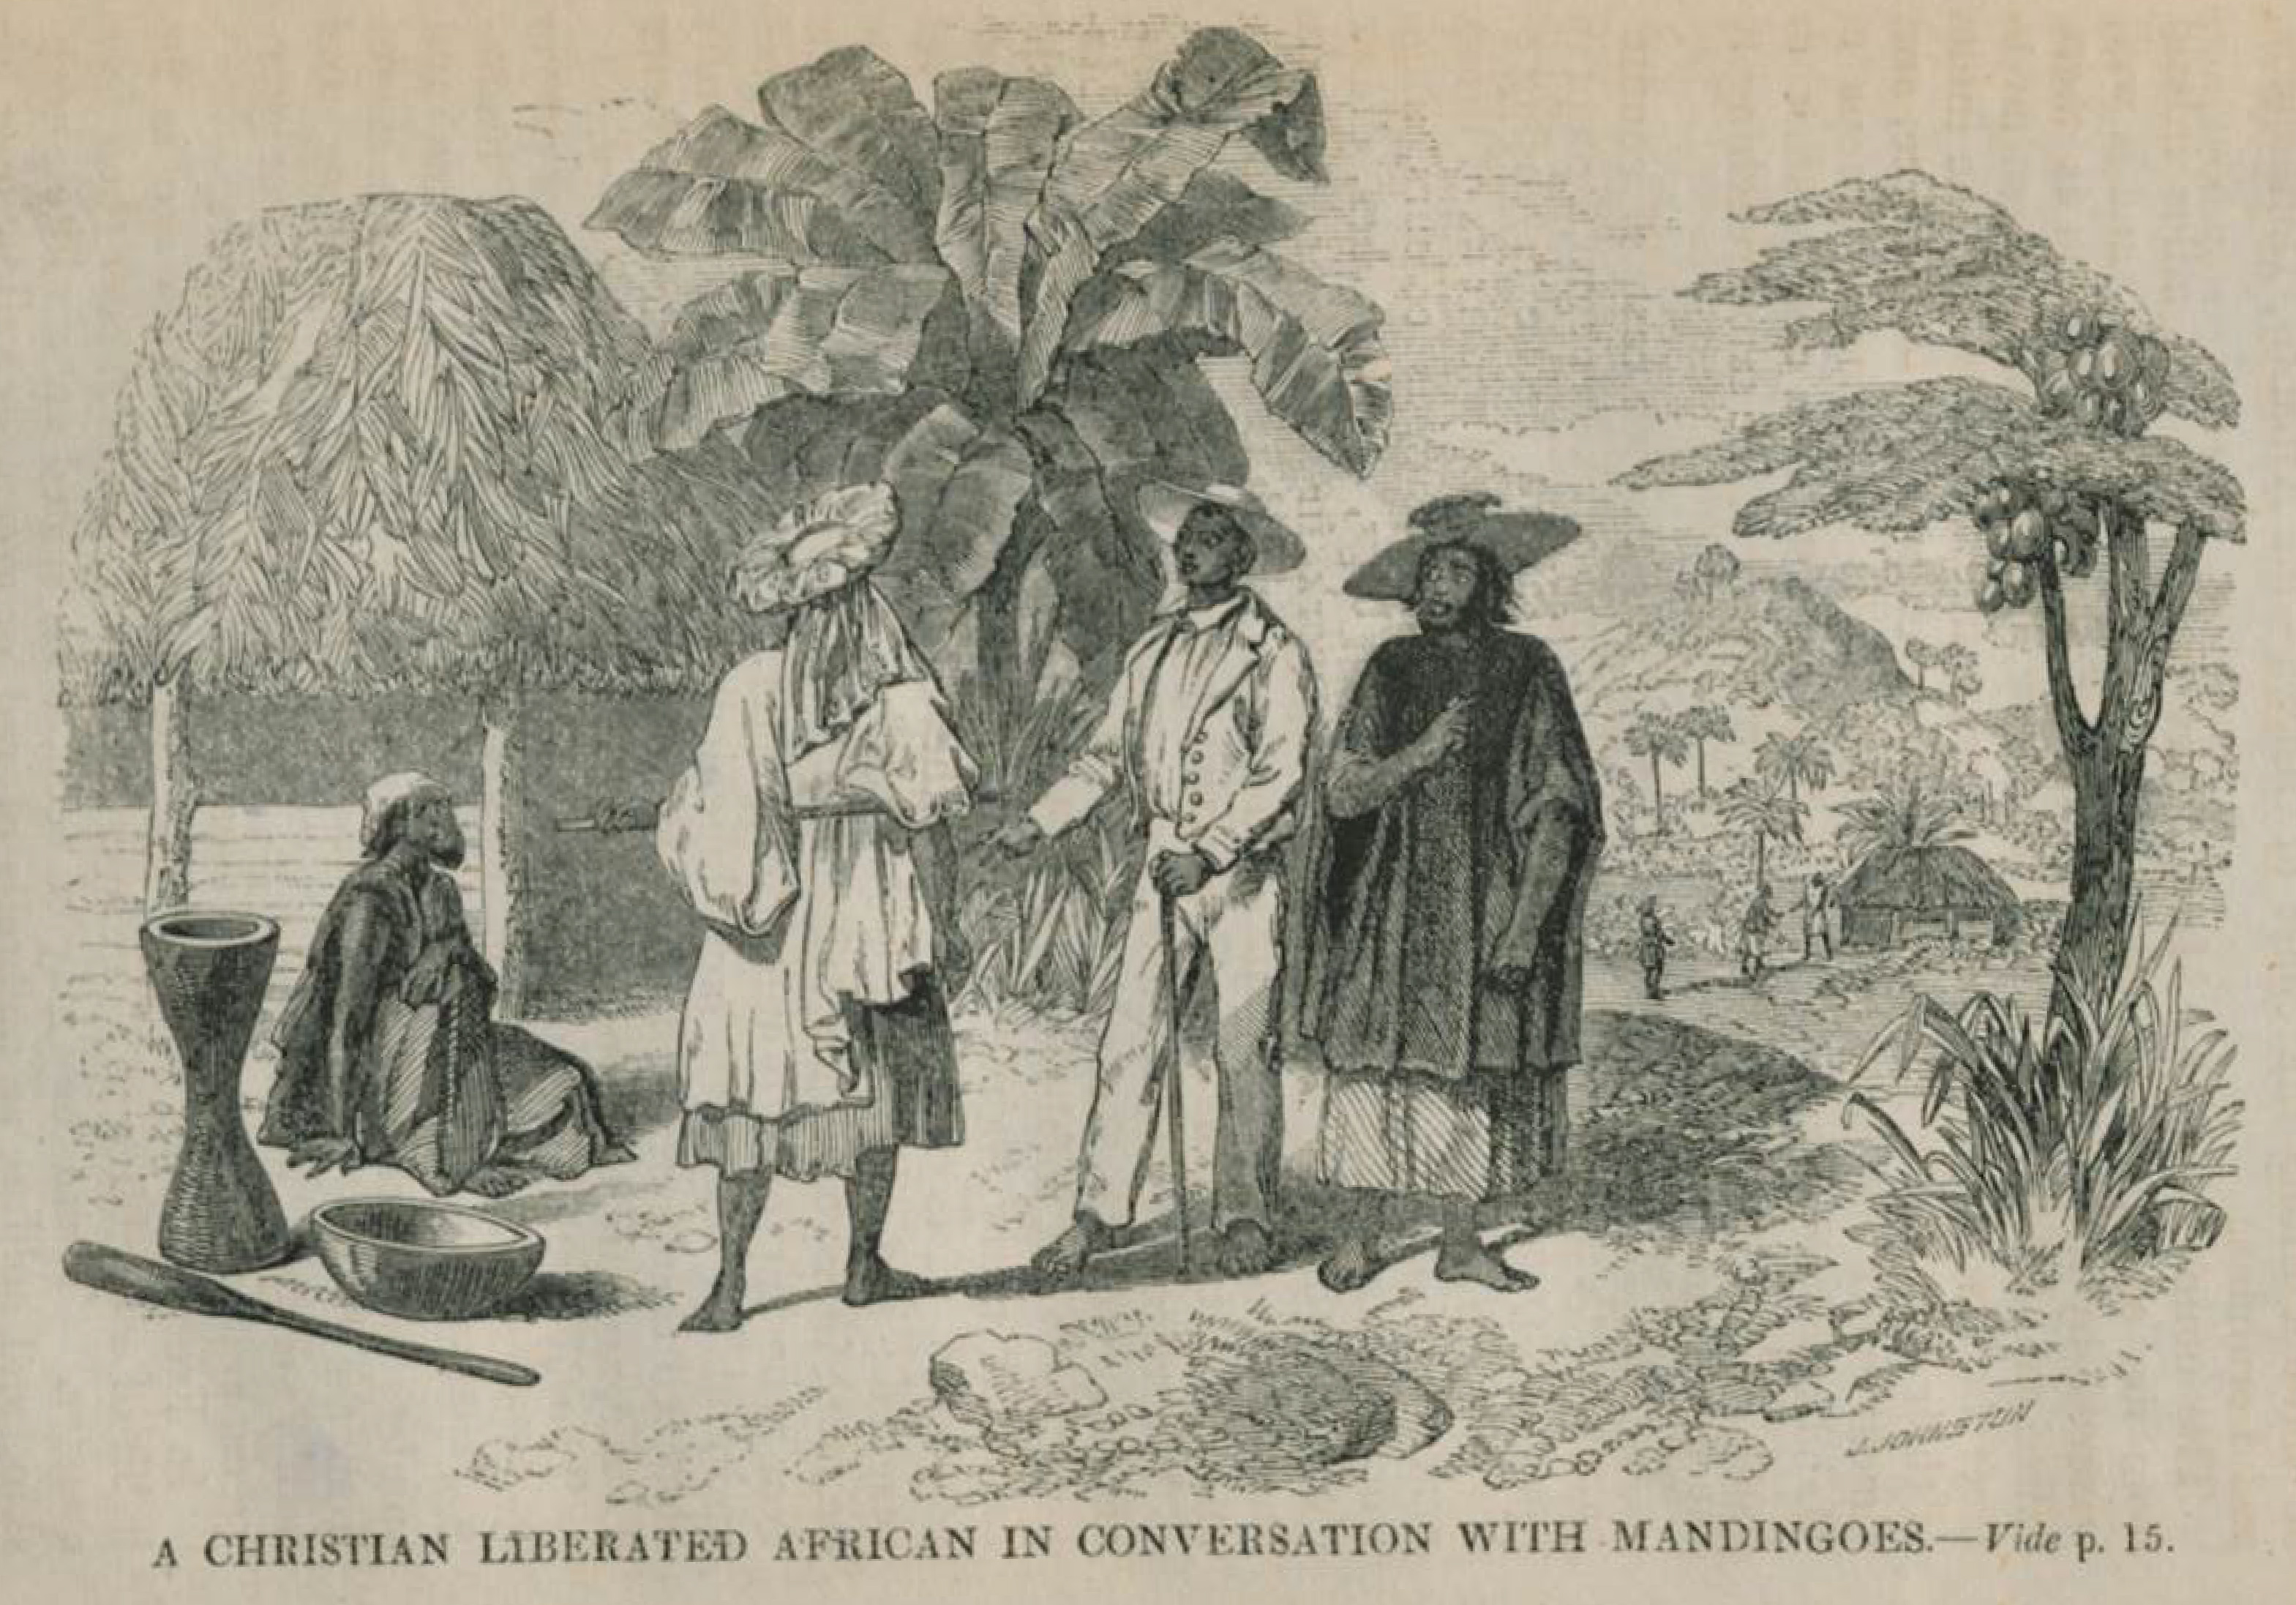 Liberated African with Mandingoes, 1852 The Church Missionary Gleaner